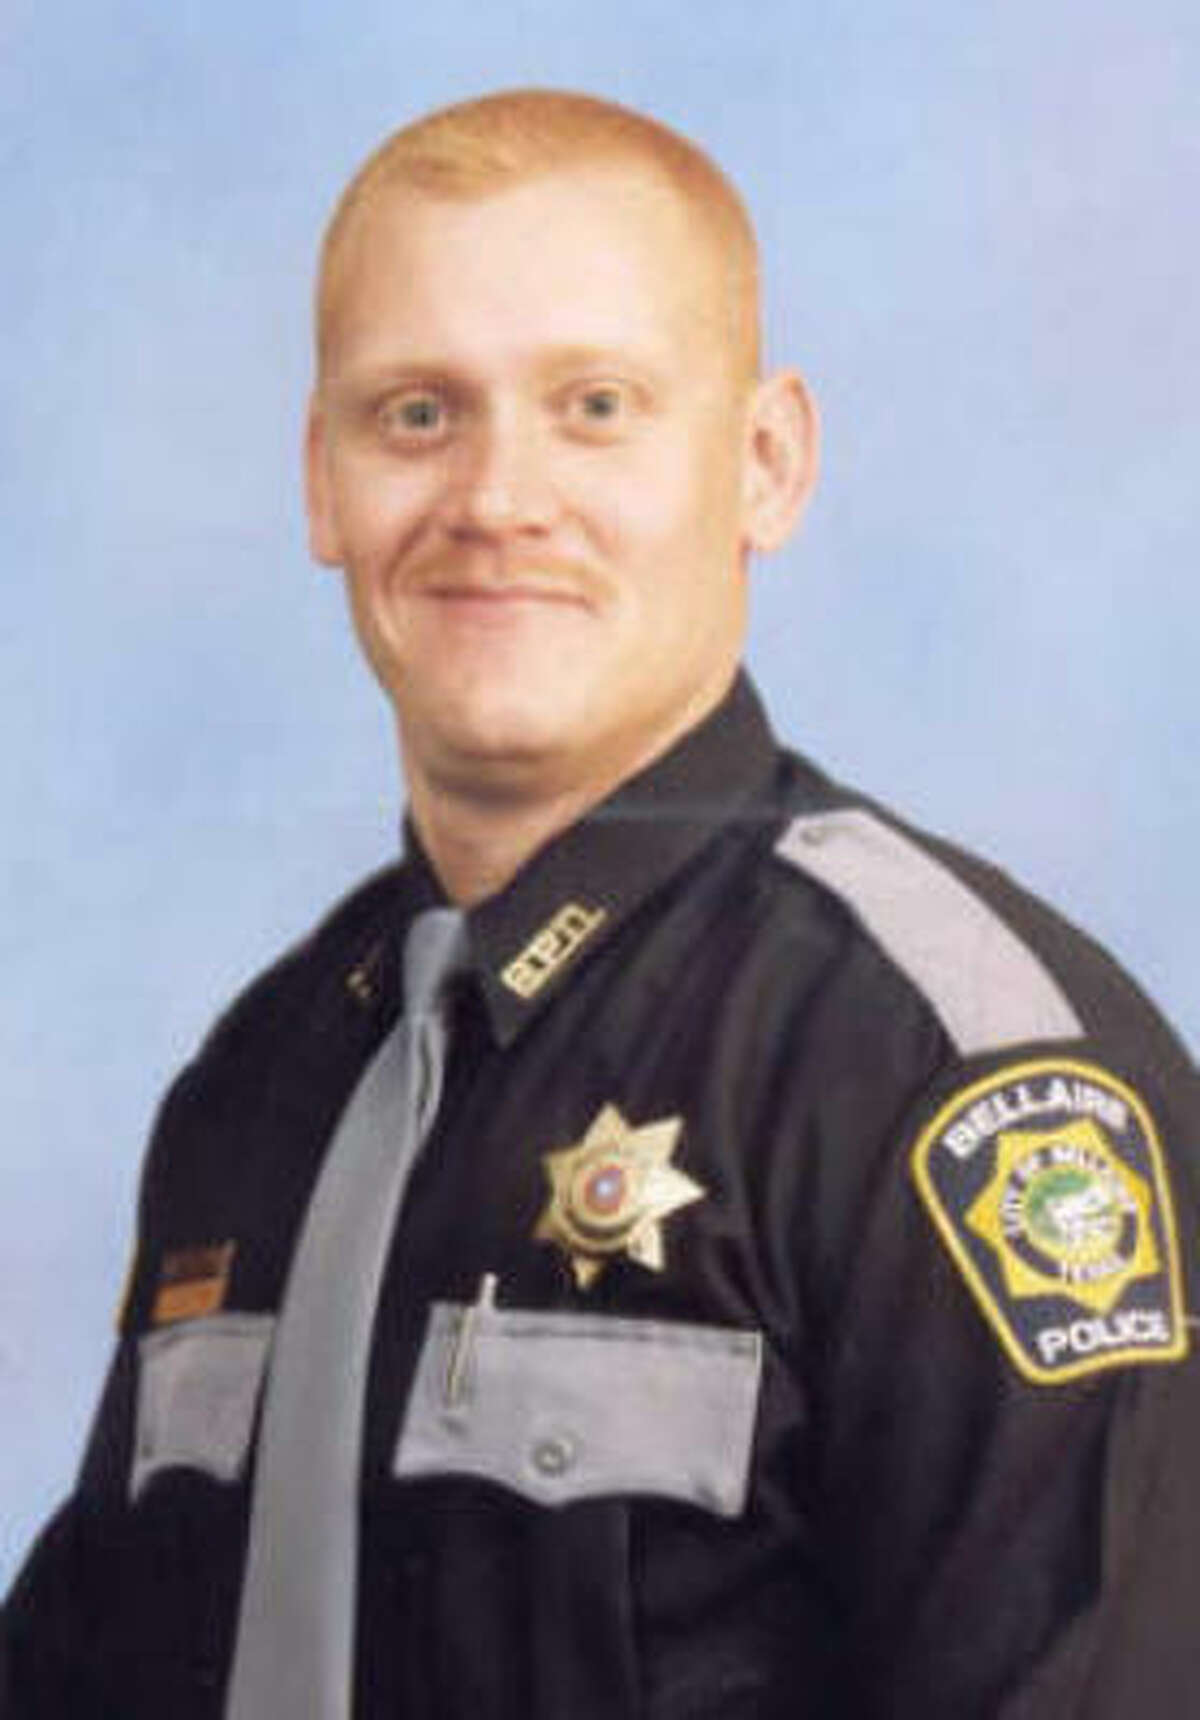 Sgt. Jeff Cotton, who joined Bellaire PD in 1998, has been placed on administrative leave.